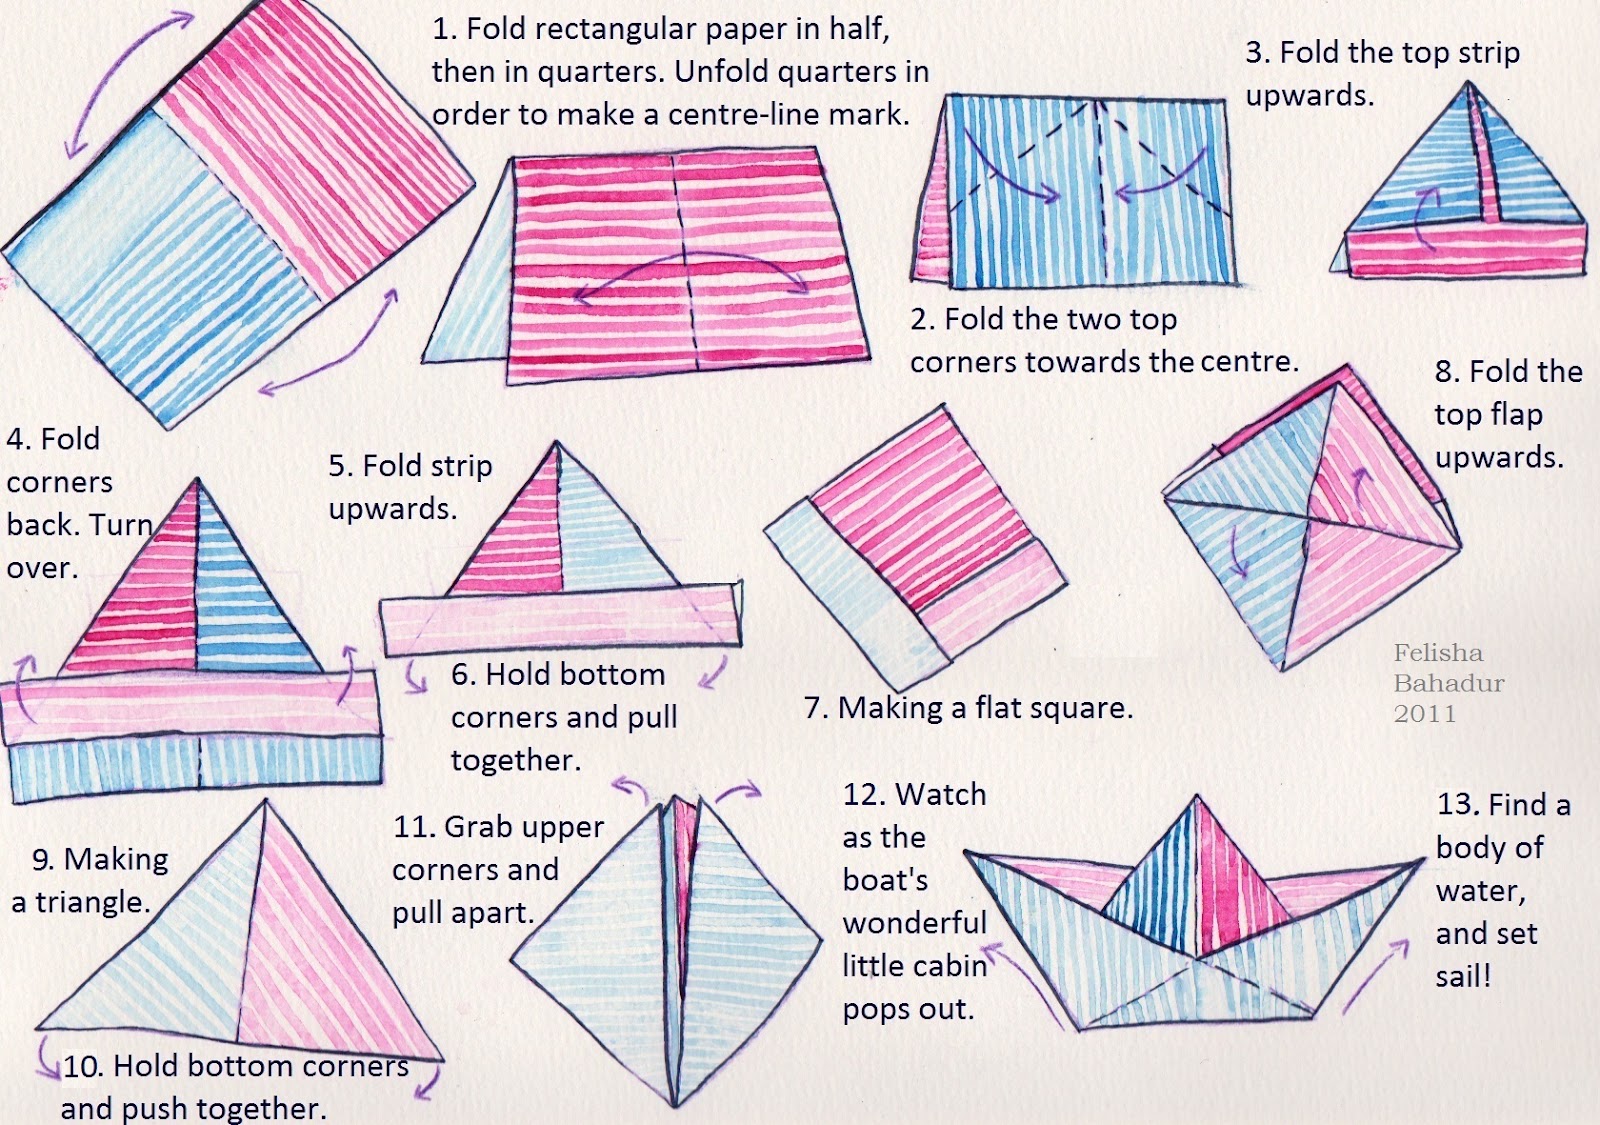 Unmoored. A Paper Boat Project